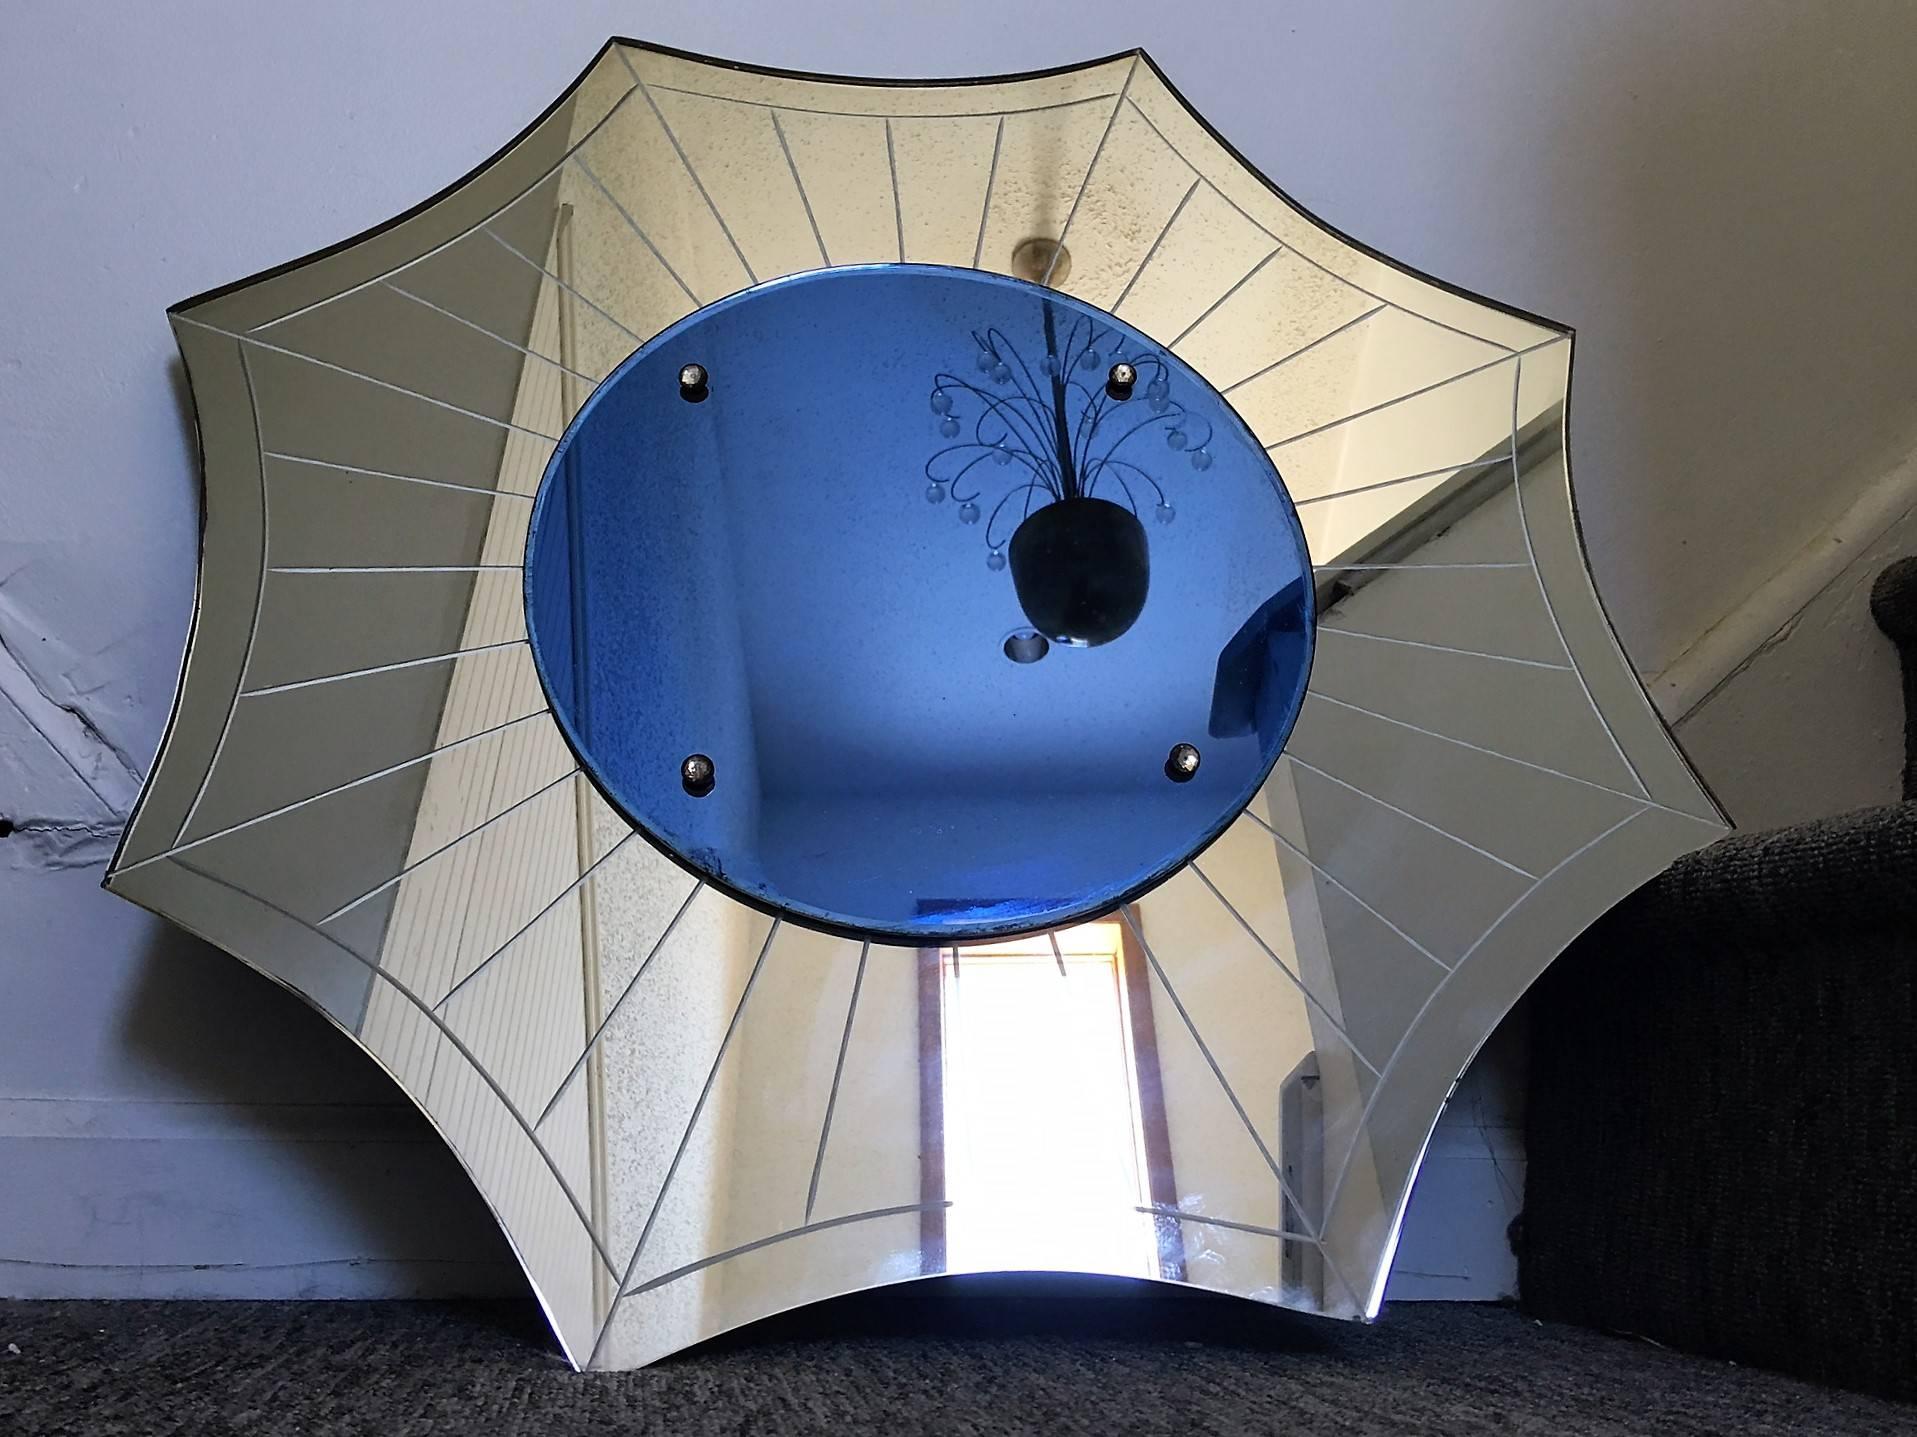 Great star form Art Deco mirror with etched line and border design with center round cobalt blue mirror. Blue mirror held with four faceted glass gem details, this mirror is a dramatic accent for any wall in an high end setting. In excellent